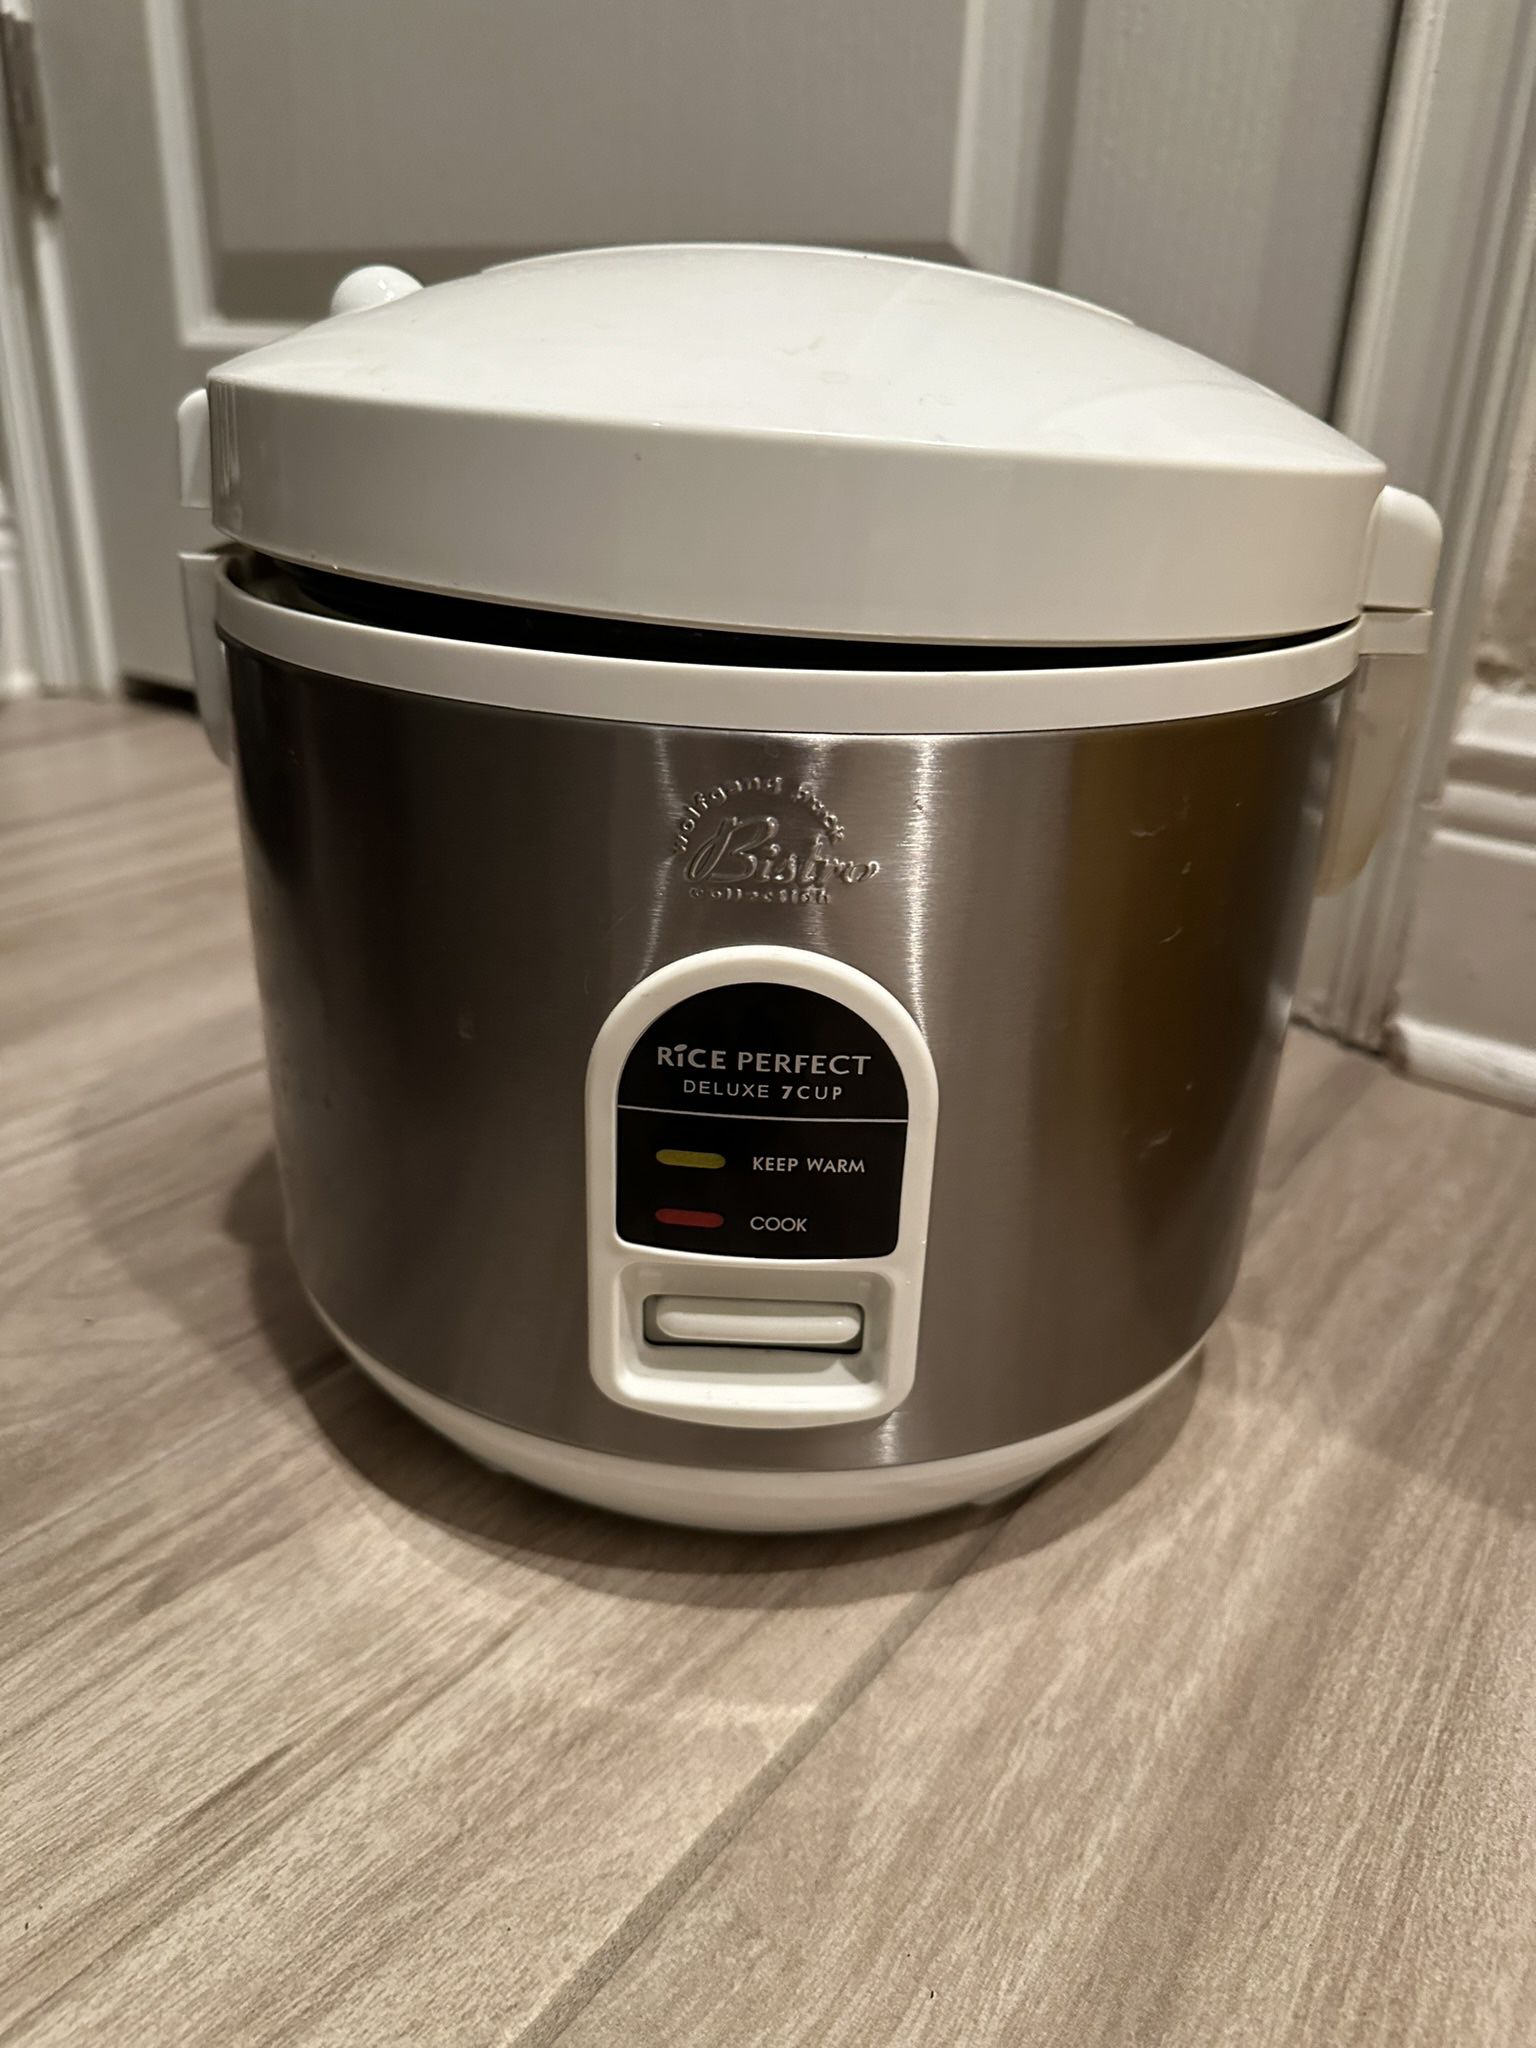 Wolfgang Puck 7cup rice cooker